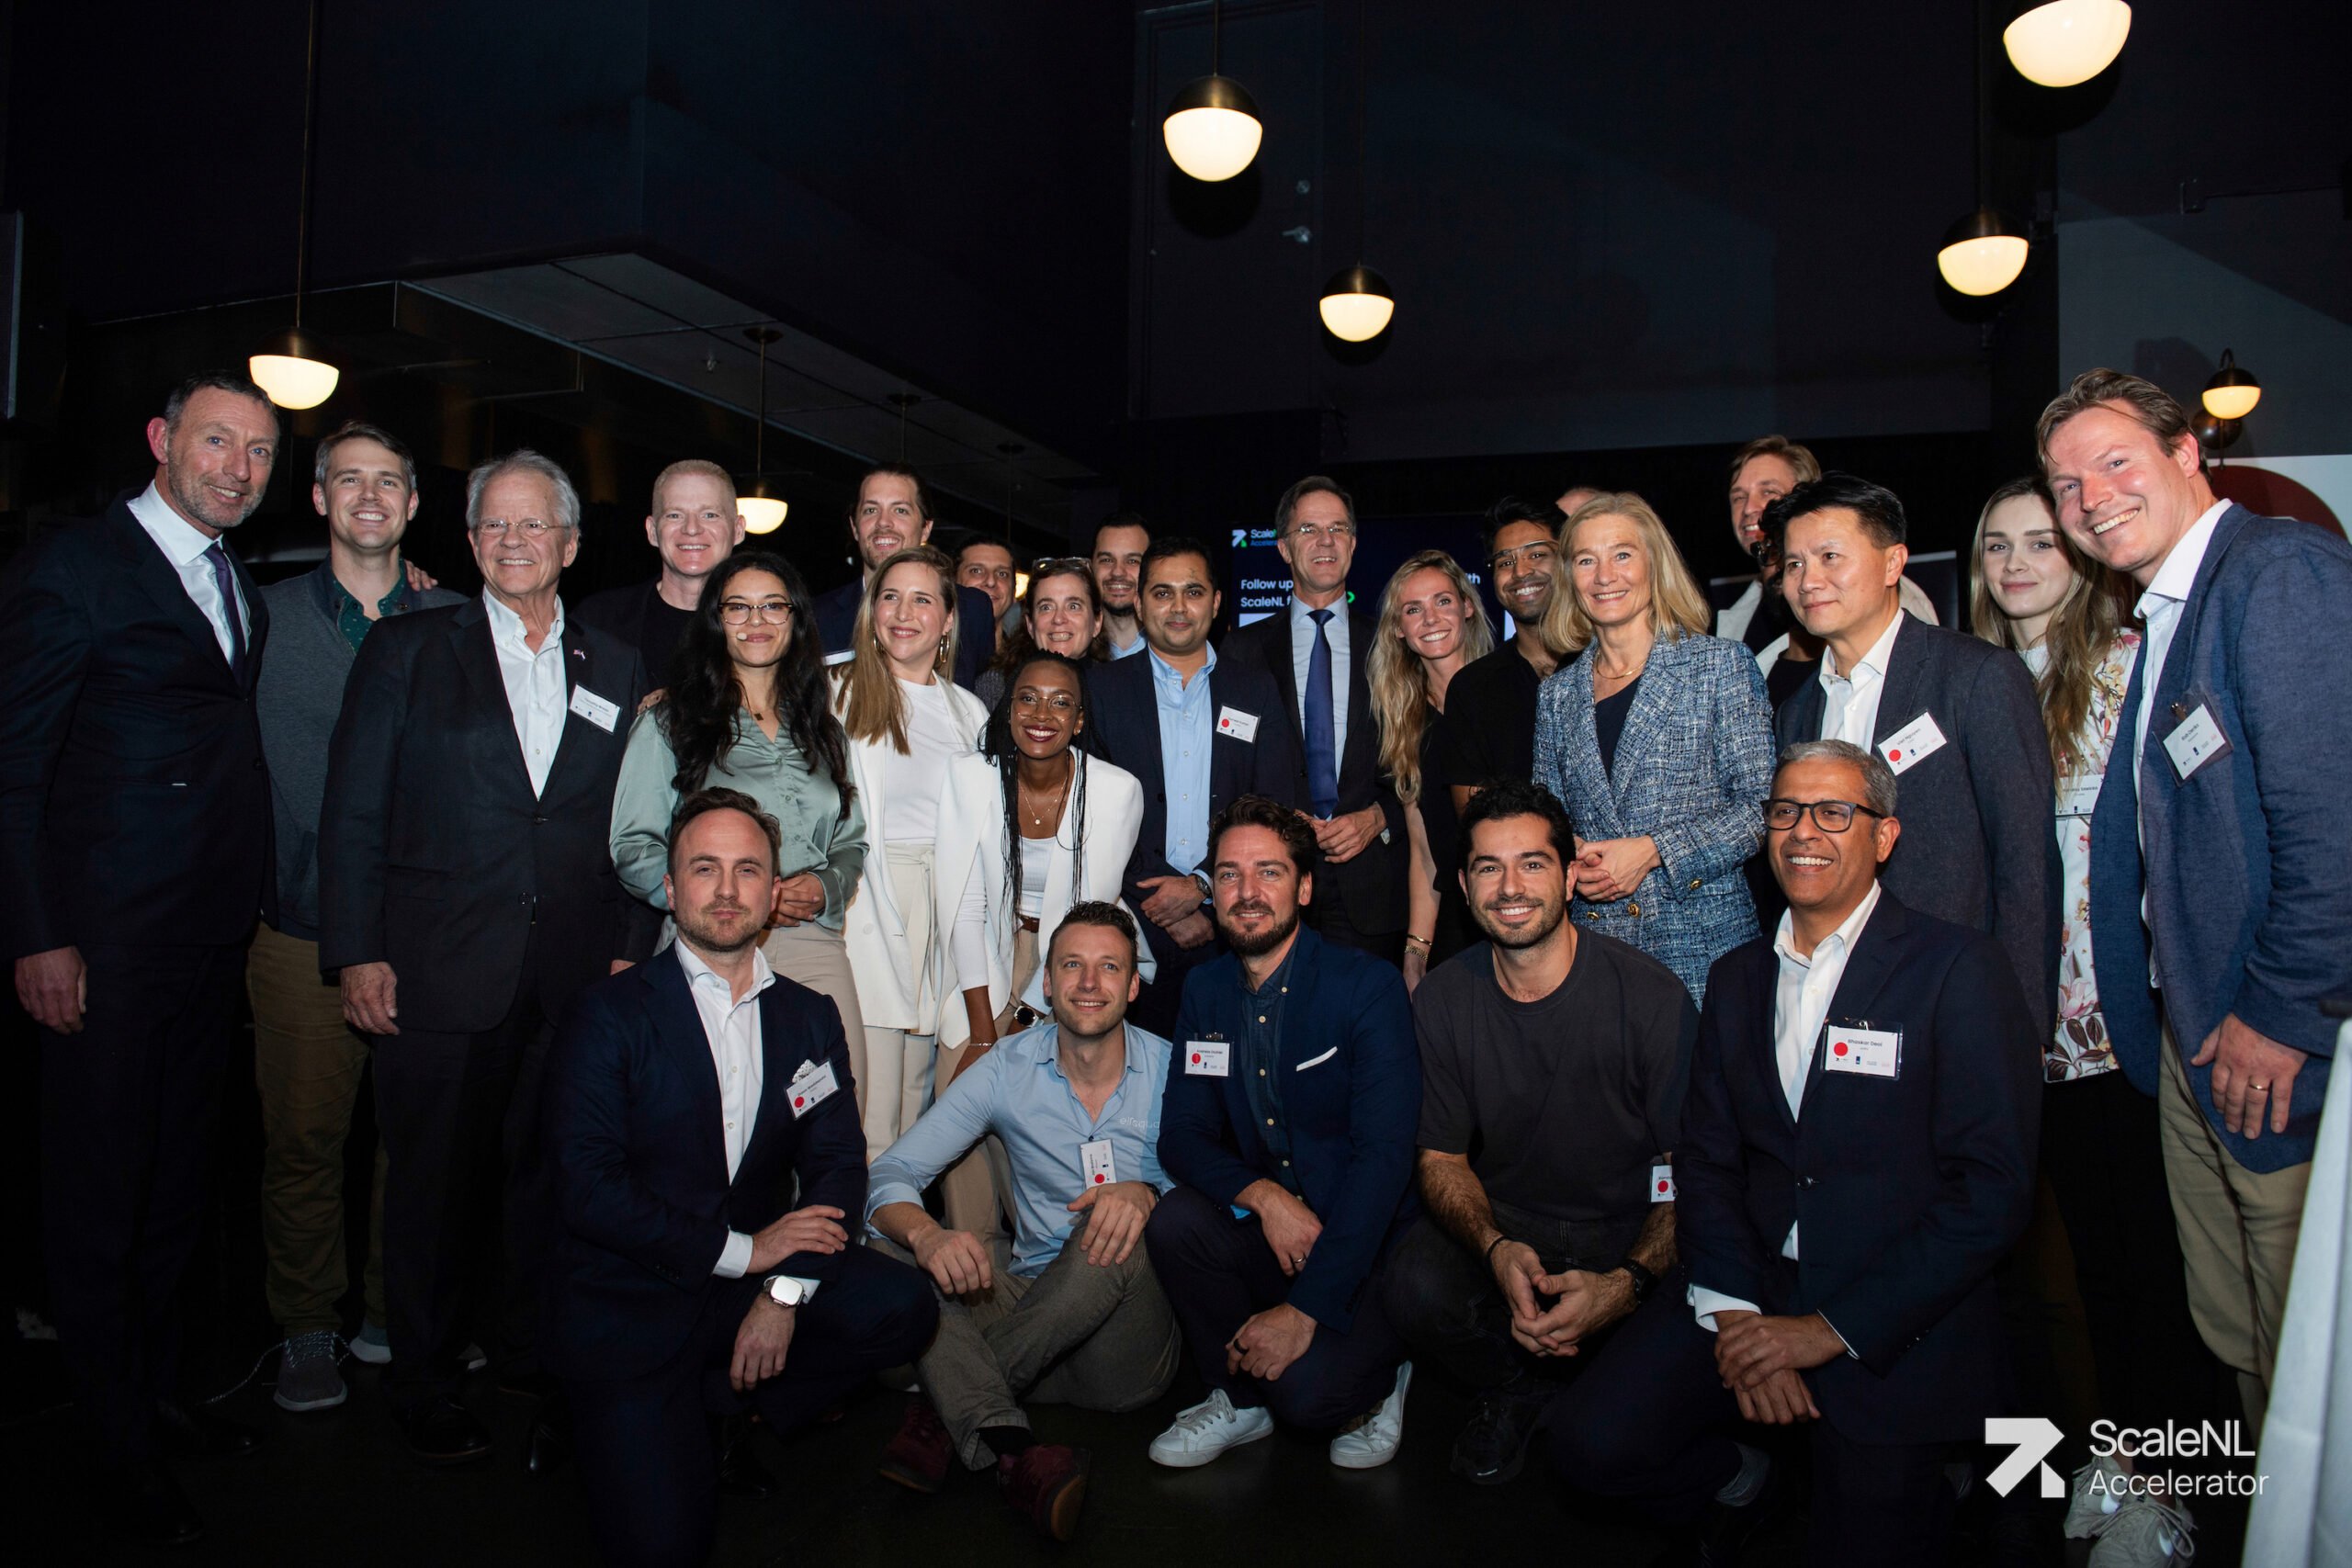 Startup founders, partners and team with the Prime Minister Mark Rutte